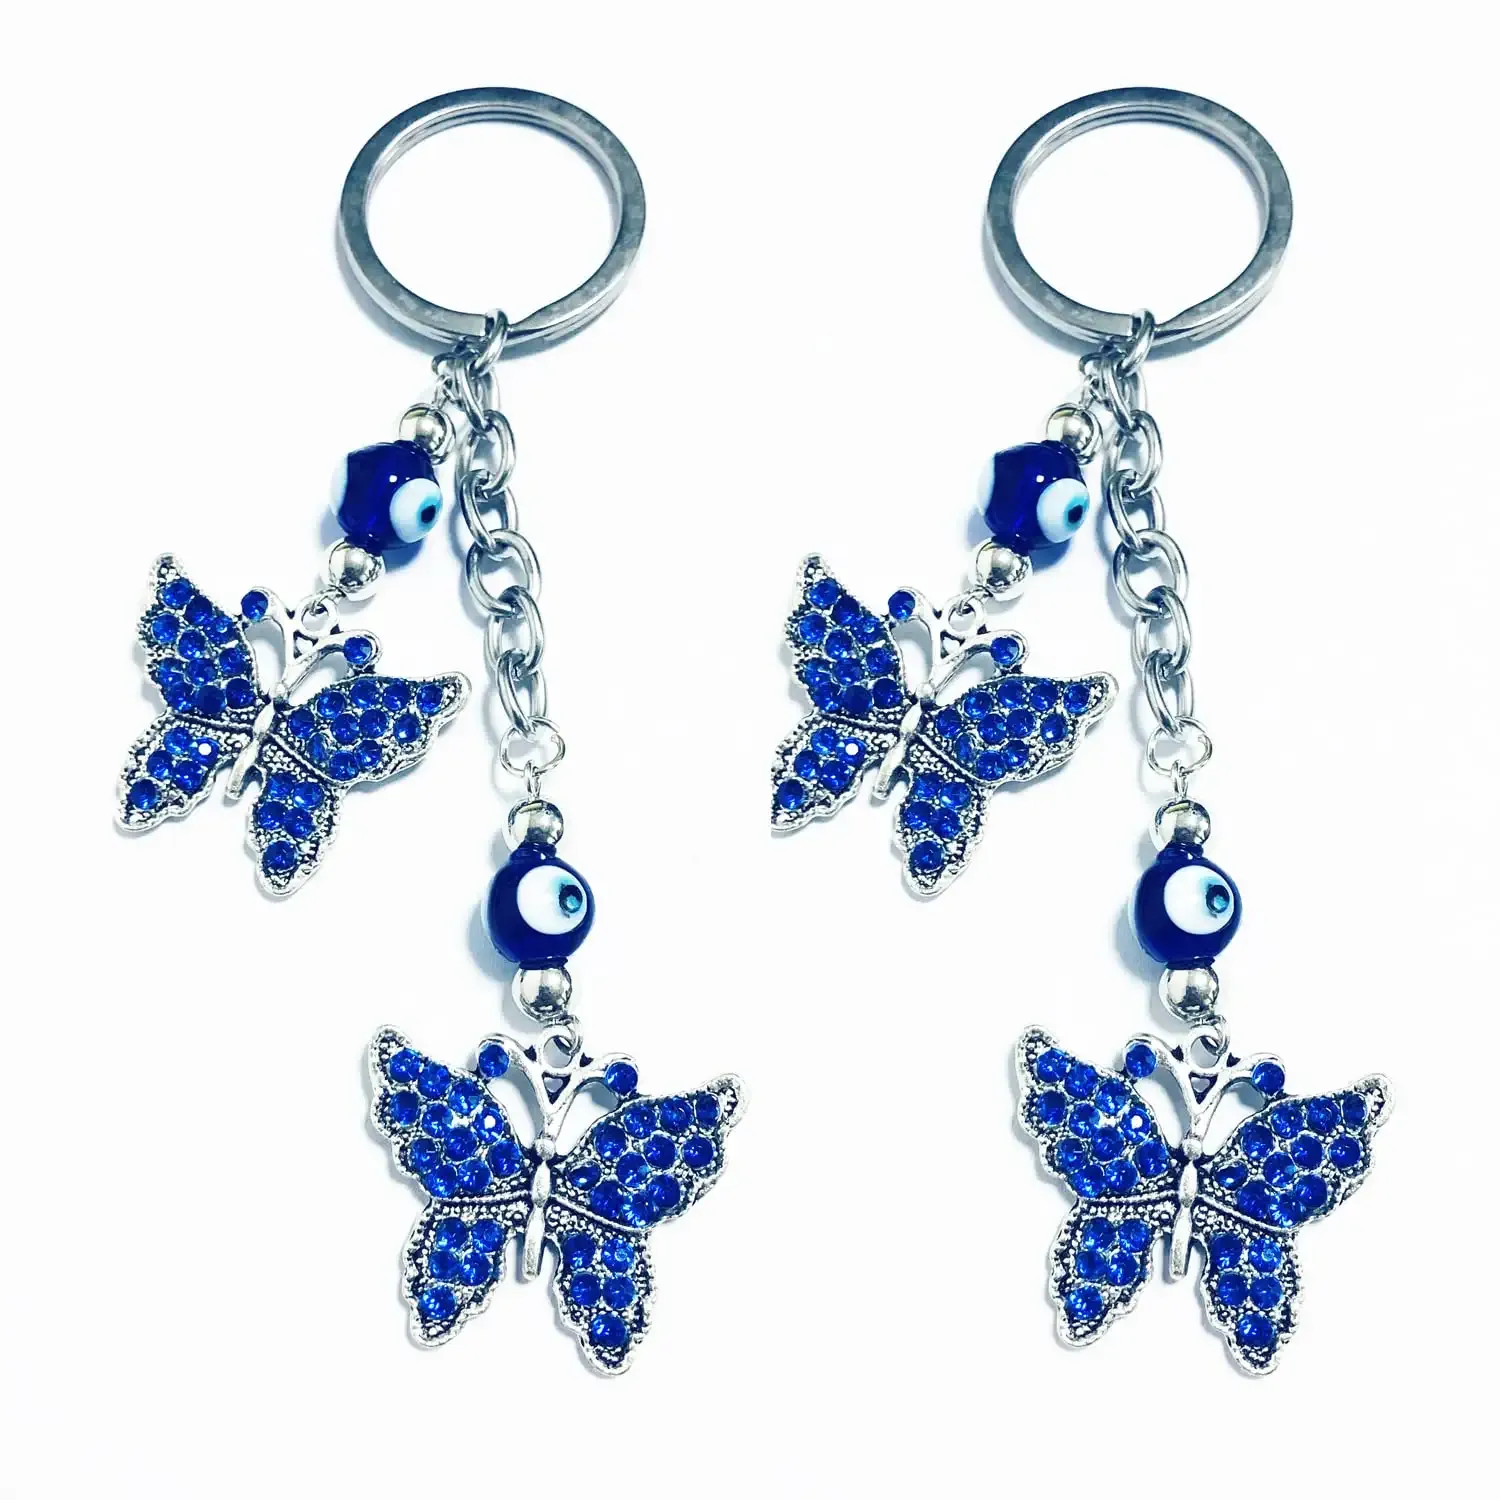 3ml luckboostium jumping  in blue crystal with evil eye beads keychain ring and tassel sign of protection good fortune home bags car rear view mirror hanging accessories 1.5 x 5.5